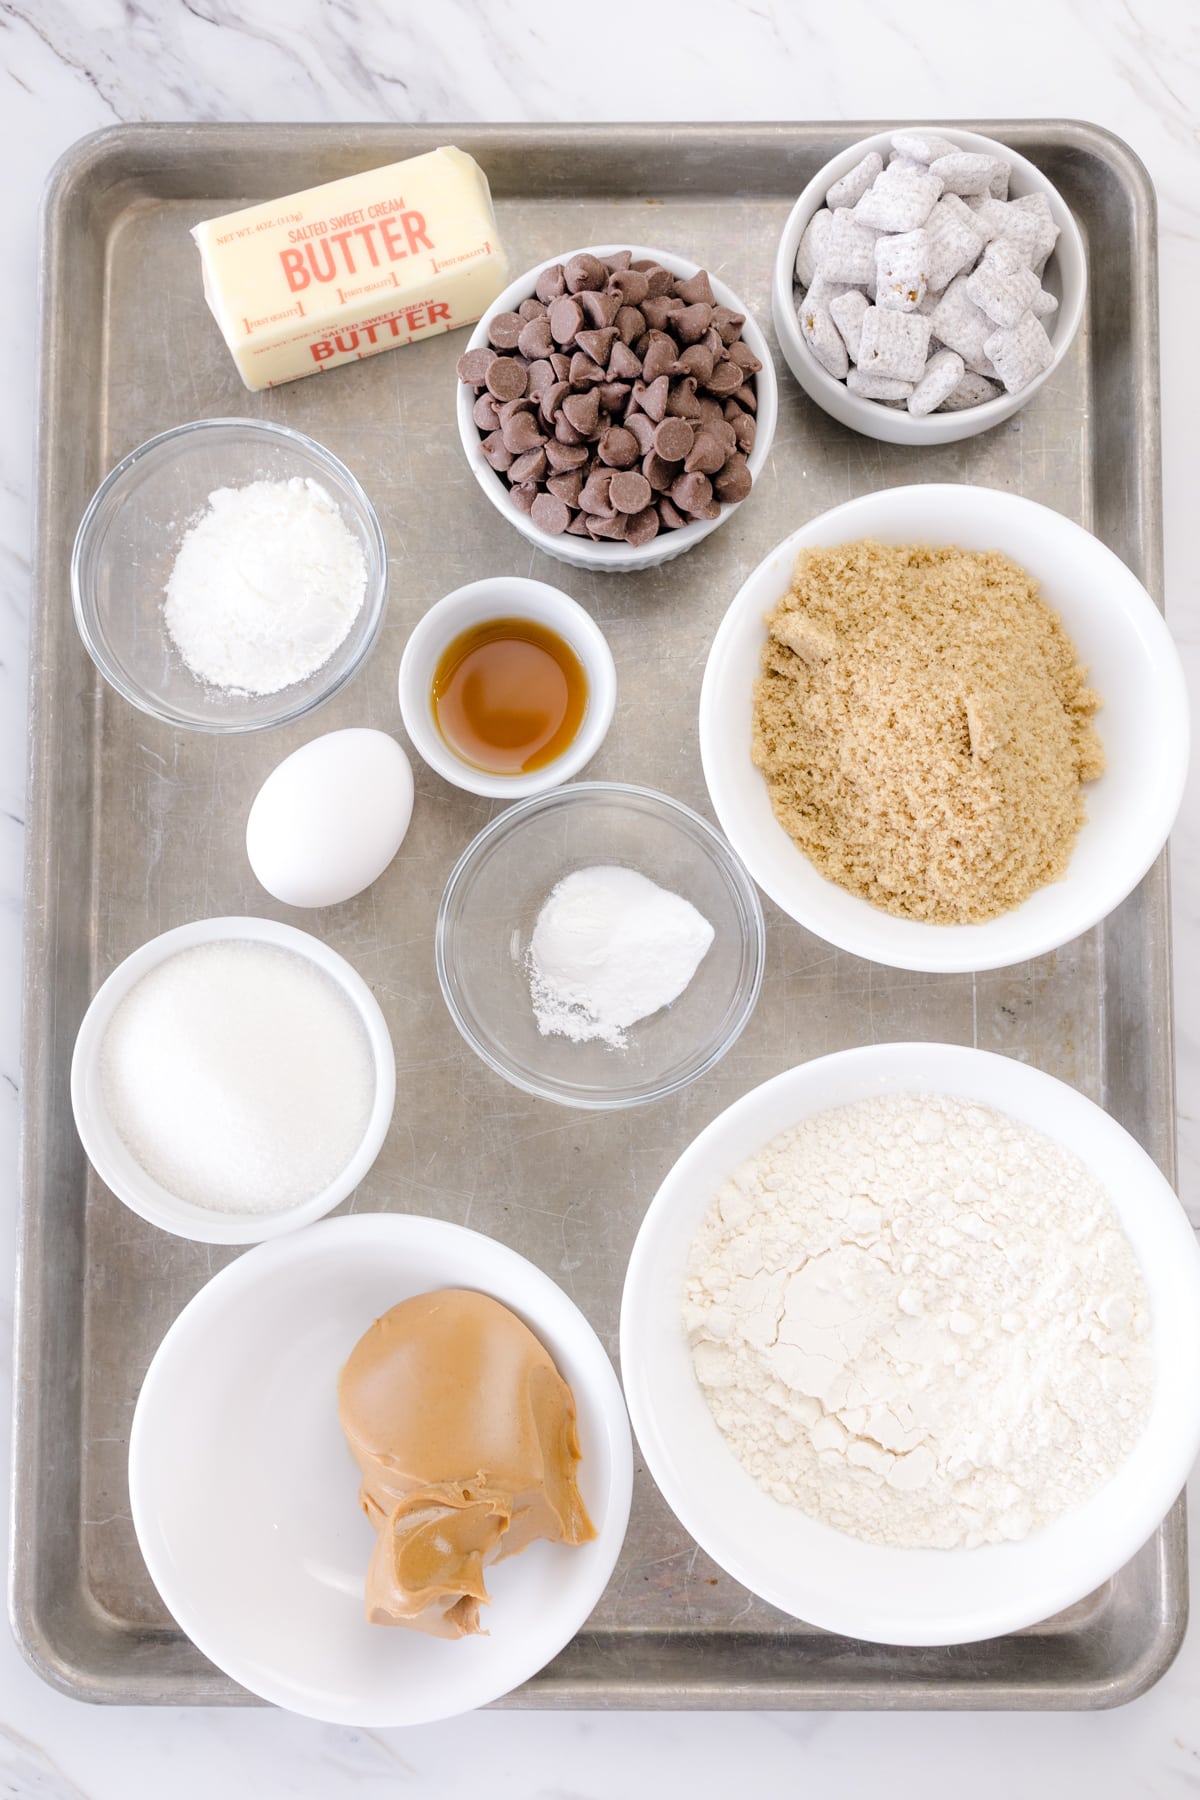 Top view of the ingredients needed to make Muddy Buddy Cookies in small bowls on a baking tray.